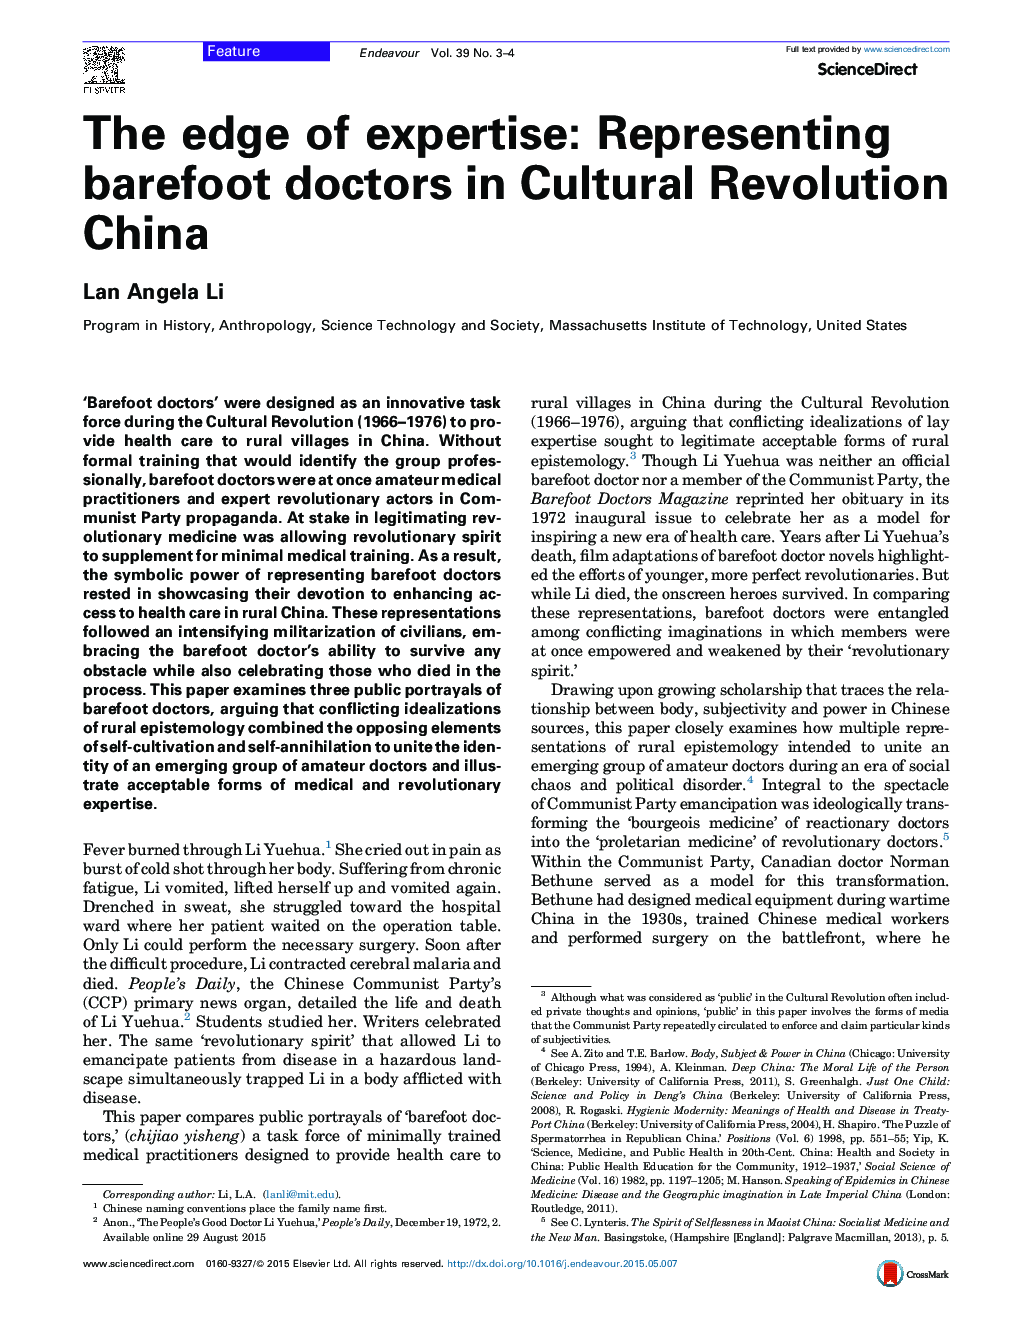 The edge of expertise: Representing barefoot doctors in Cultural Revolution China